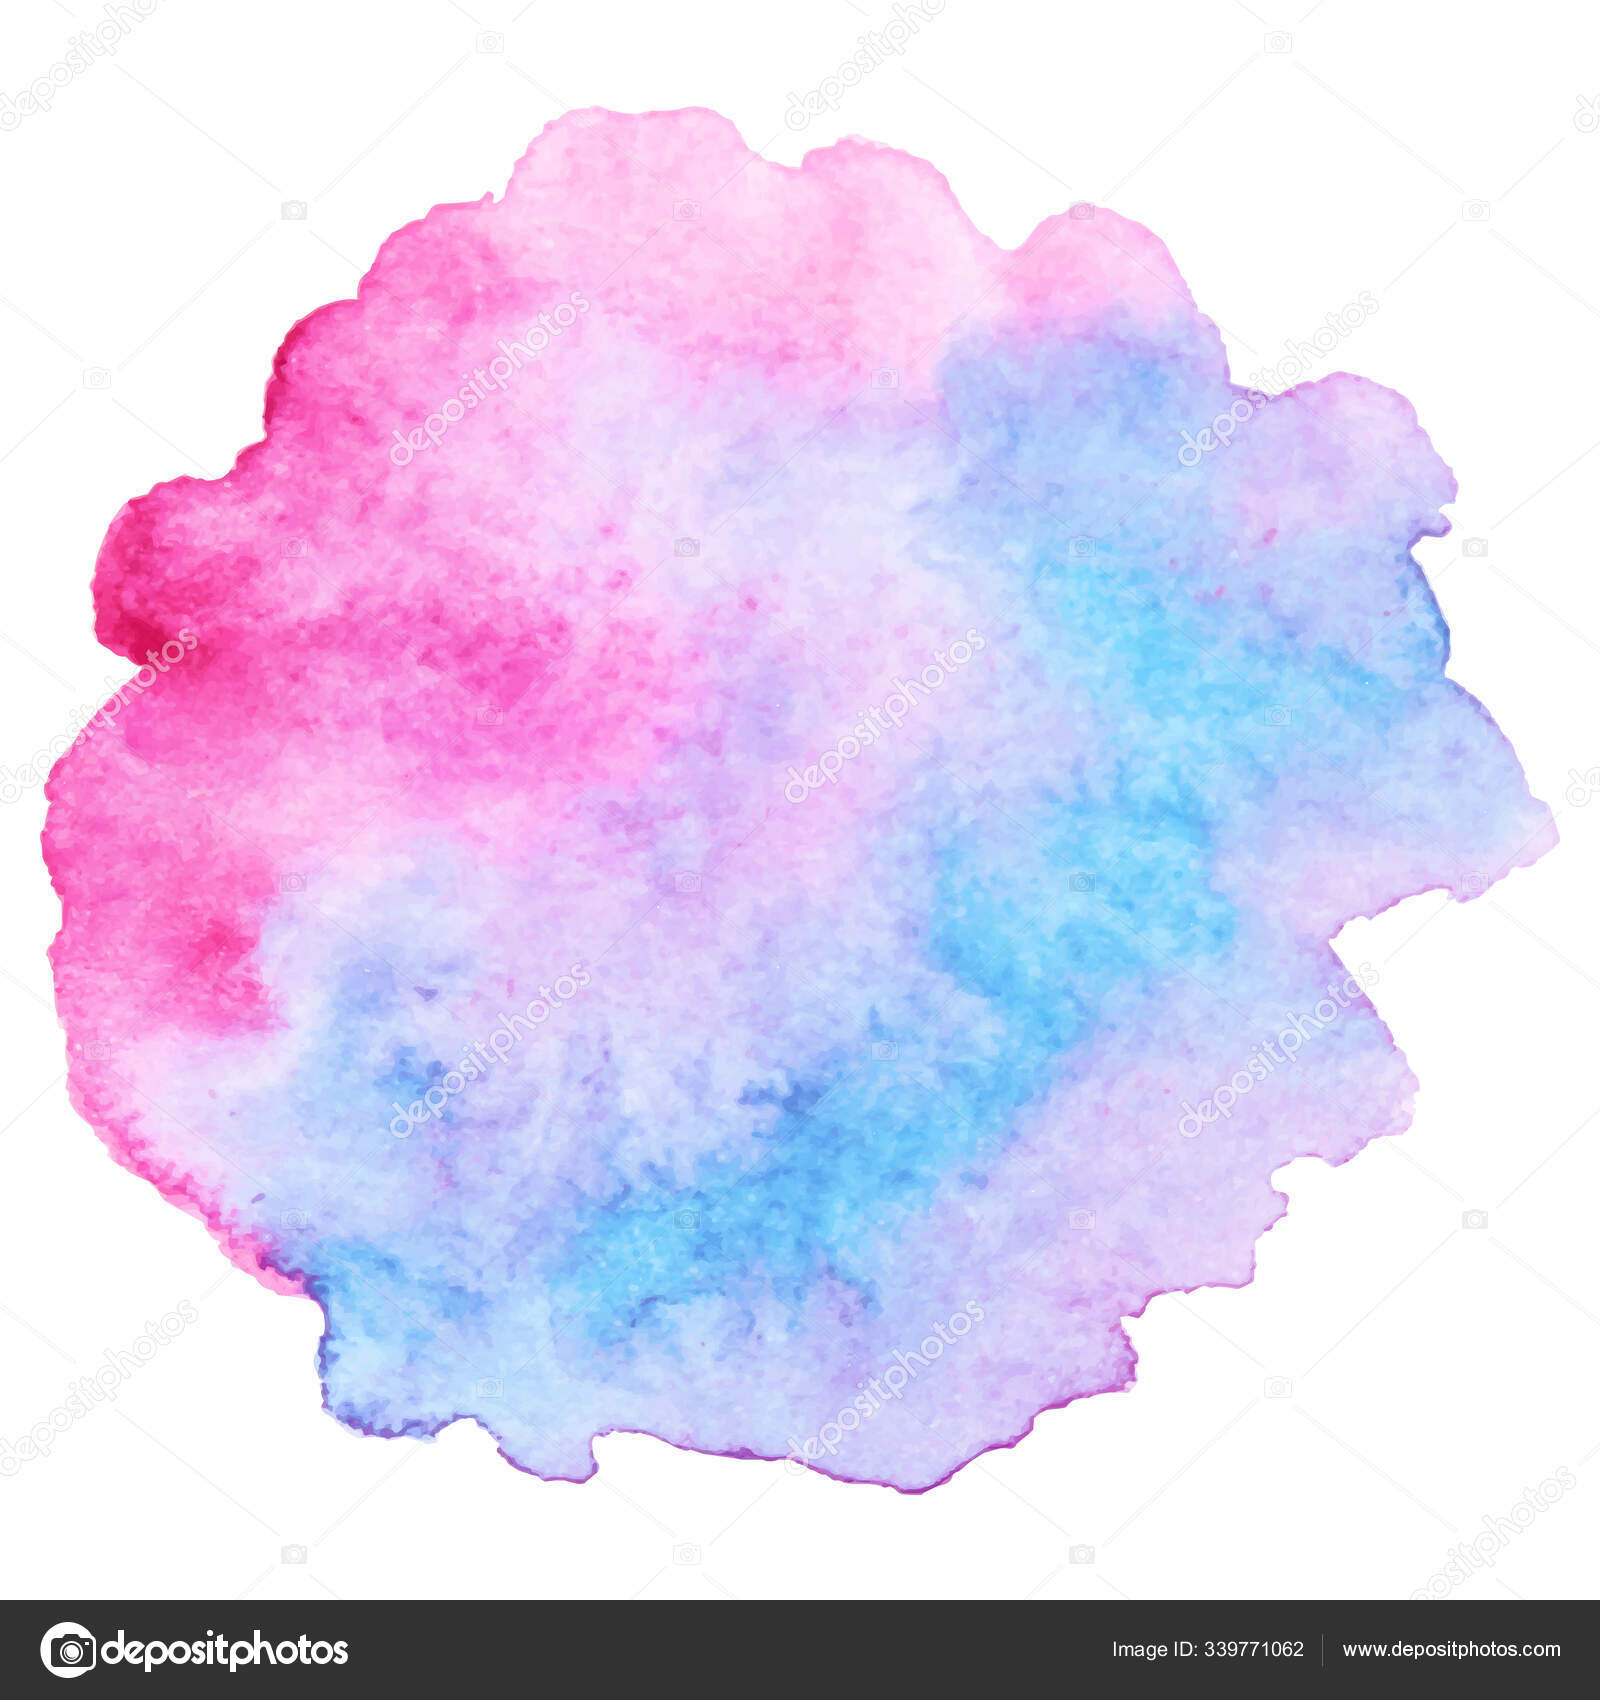 Watercolor Brush Paint Paper Texture Vector Isolated Splash On White Background For Banner Poster Wallpaper Vector Image By C Kseany Vector Stock